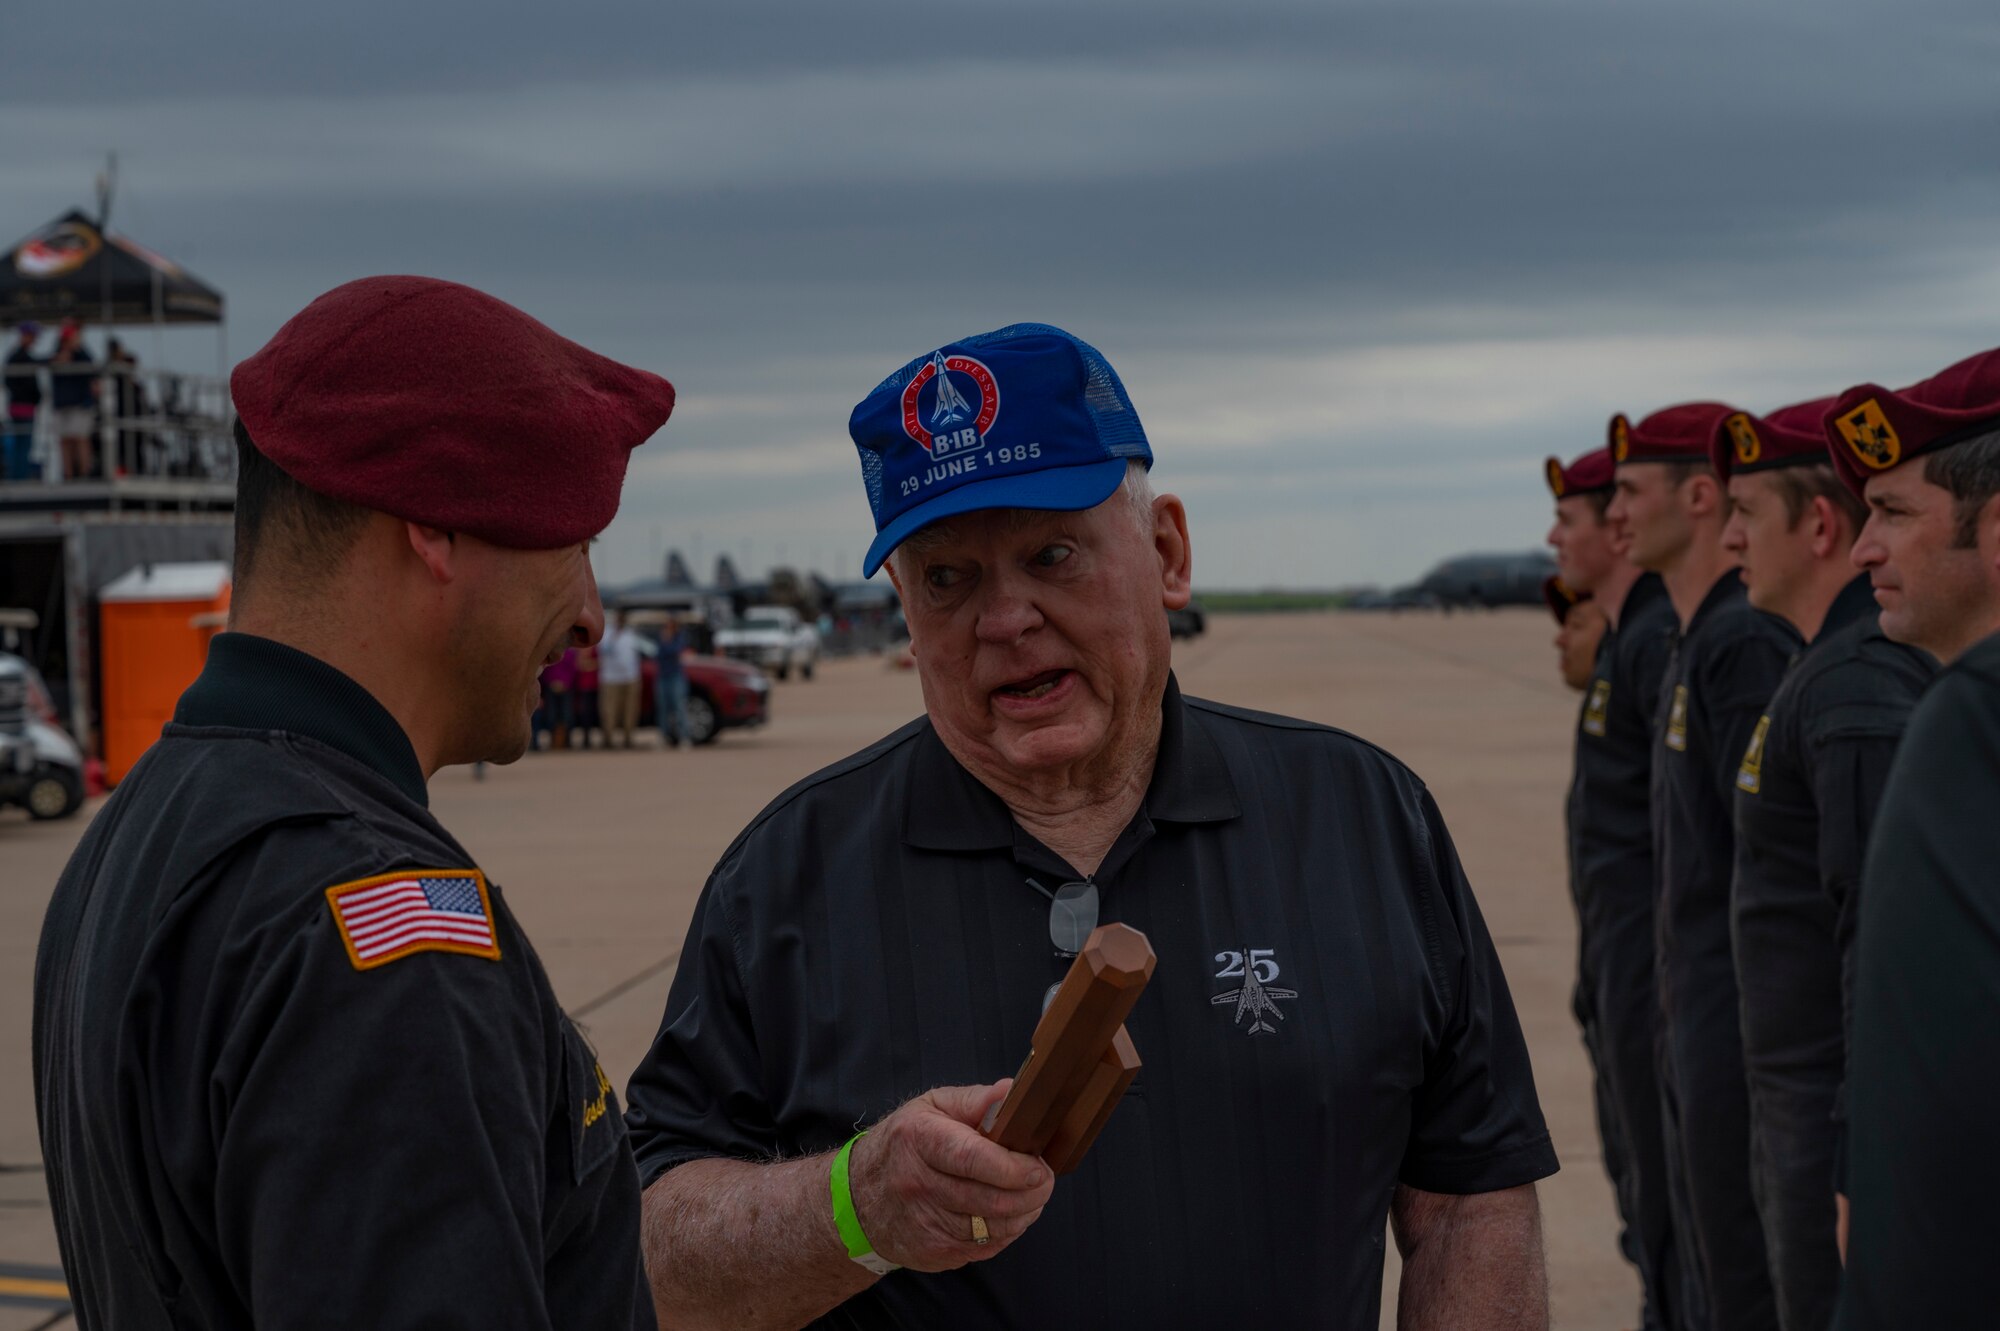 A member of the U.S. Army Golden Knights hands a ceremonial baton to retired U.S. Air Force Col. Larry Jordan during the 2023 Dyess Big Country Air Fest on Dyess Air Force Base, Texas, April 22, 2023. More than 30,000 event goers attended the one-day event highlighting the best of America’s only Lift and Strike base, Air Force heritage and Dyess community partners. The air show featured the F-22 Raptor demo team, U.S. Air Force Academy Wings of Blue, U.S. Army Golden Knights, WWII heritage flight and B-1B Lancer and C-130J Super Hercules fly overs. (U.S. Air Force photo by Senior Airman Josiah Brown)